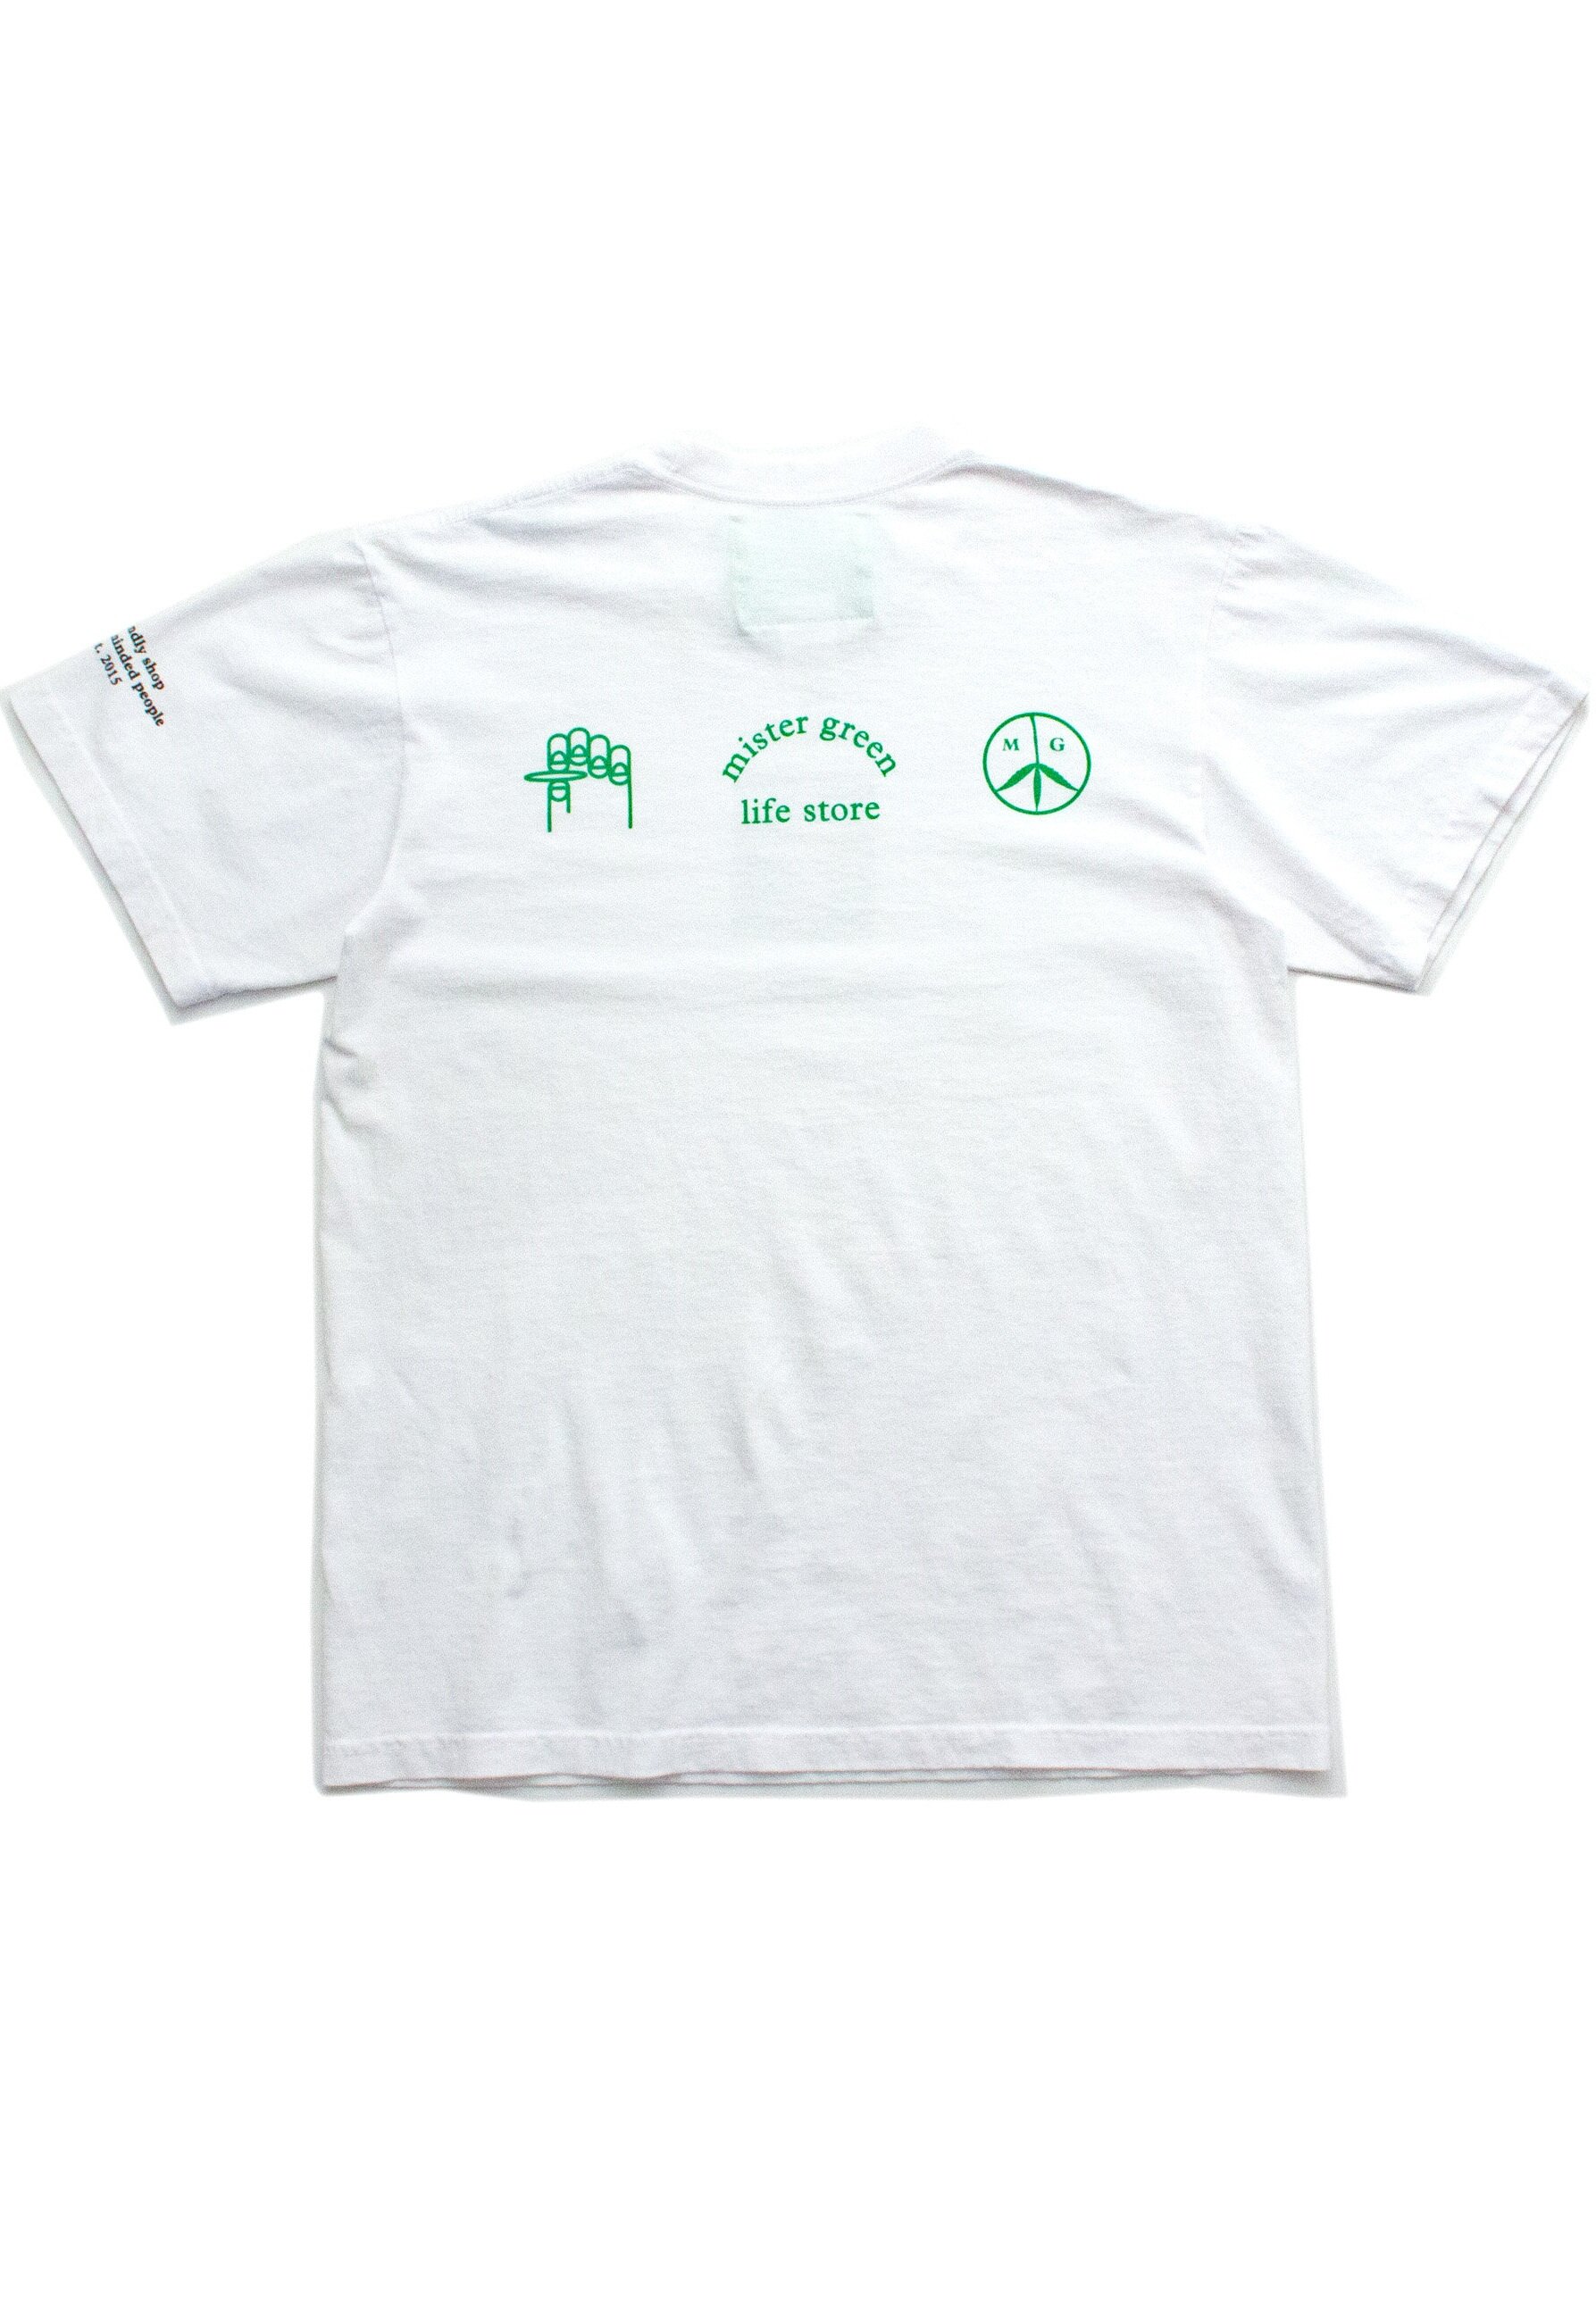 All Clothing — Mister Green Life Store